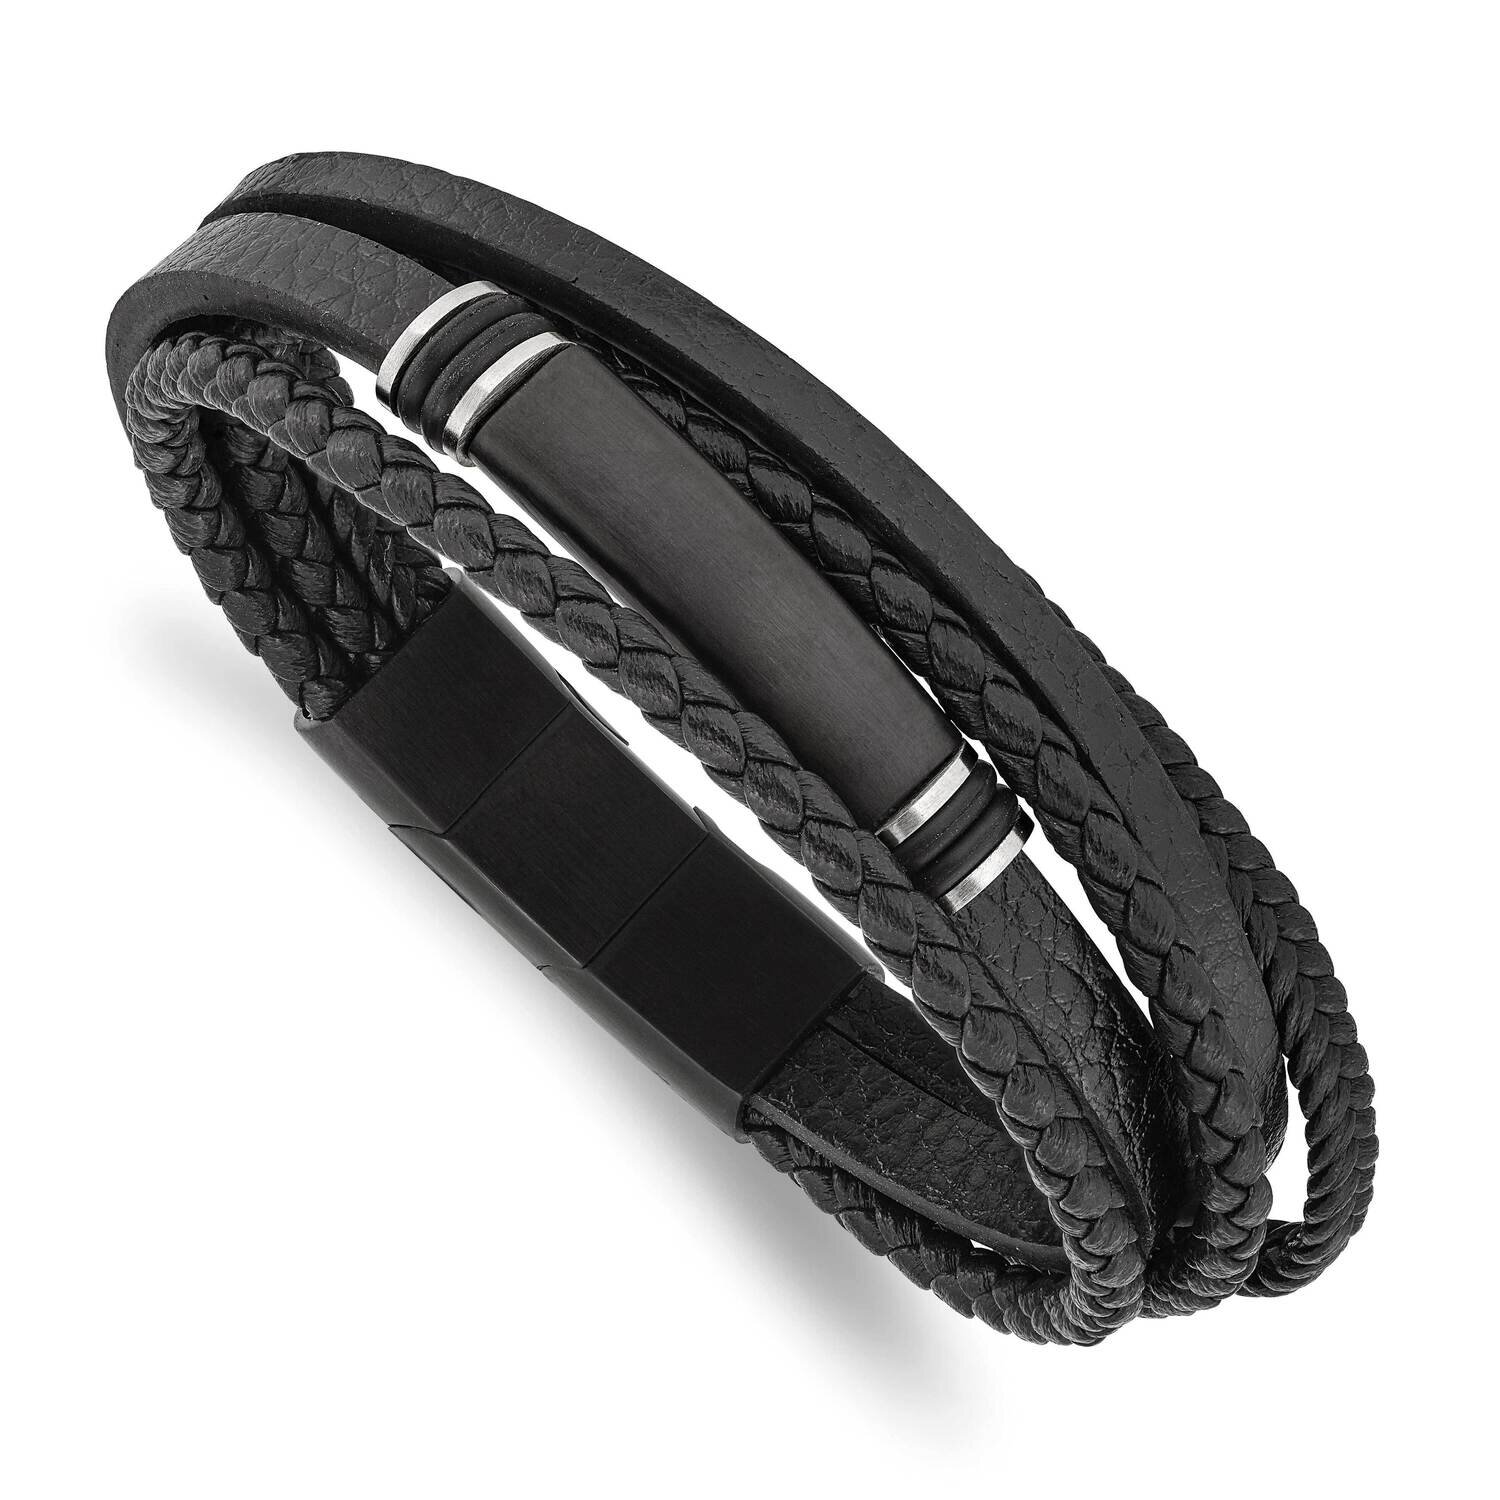 Black Ip Pu Leather/Rubber with .5 Inch Extender 8 Inch Bracelet Stainless Steel Brushed SRB2719-8